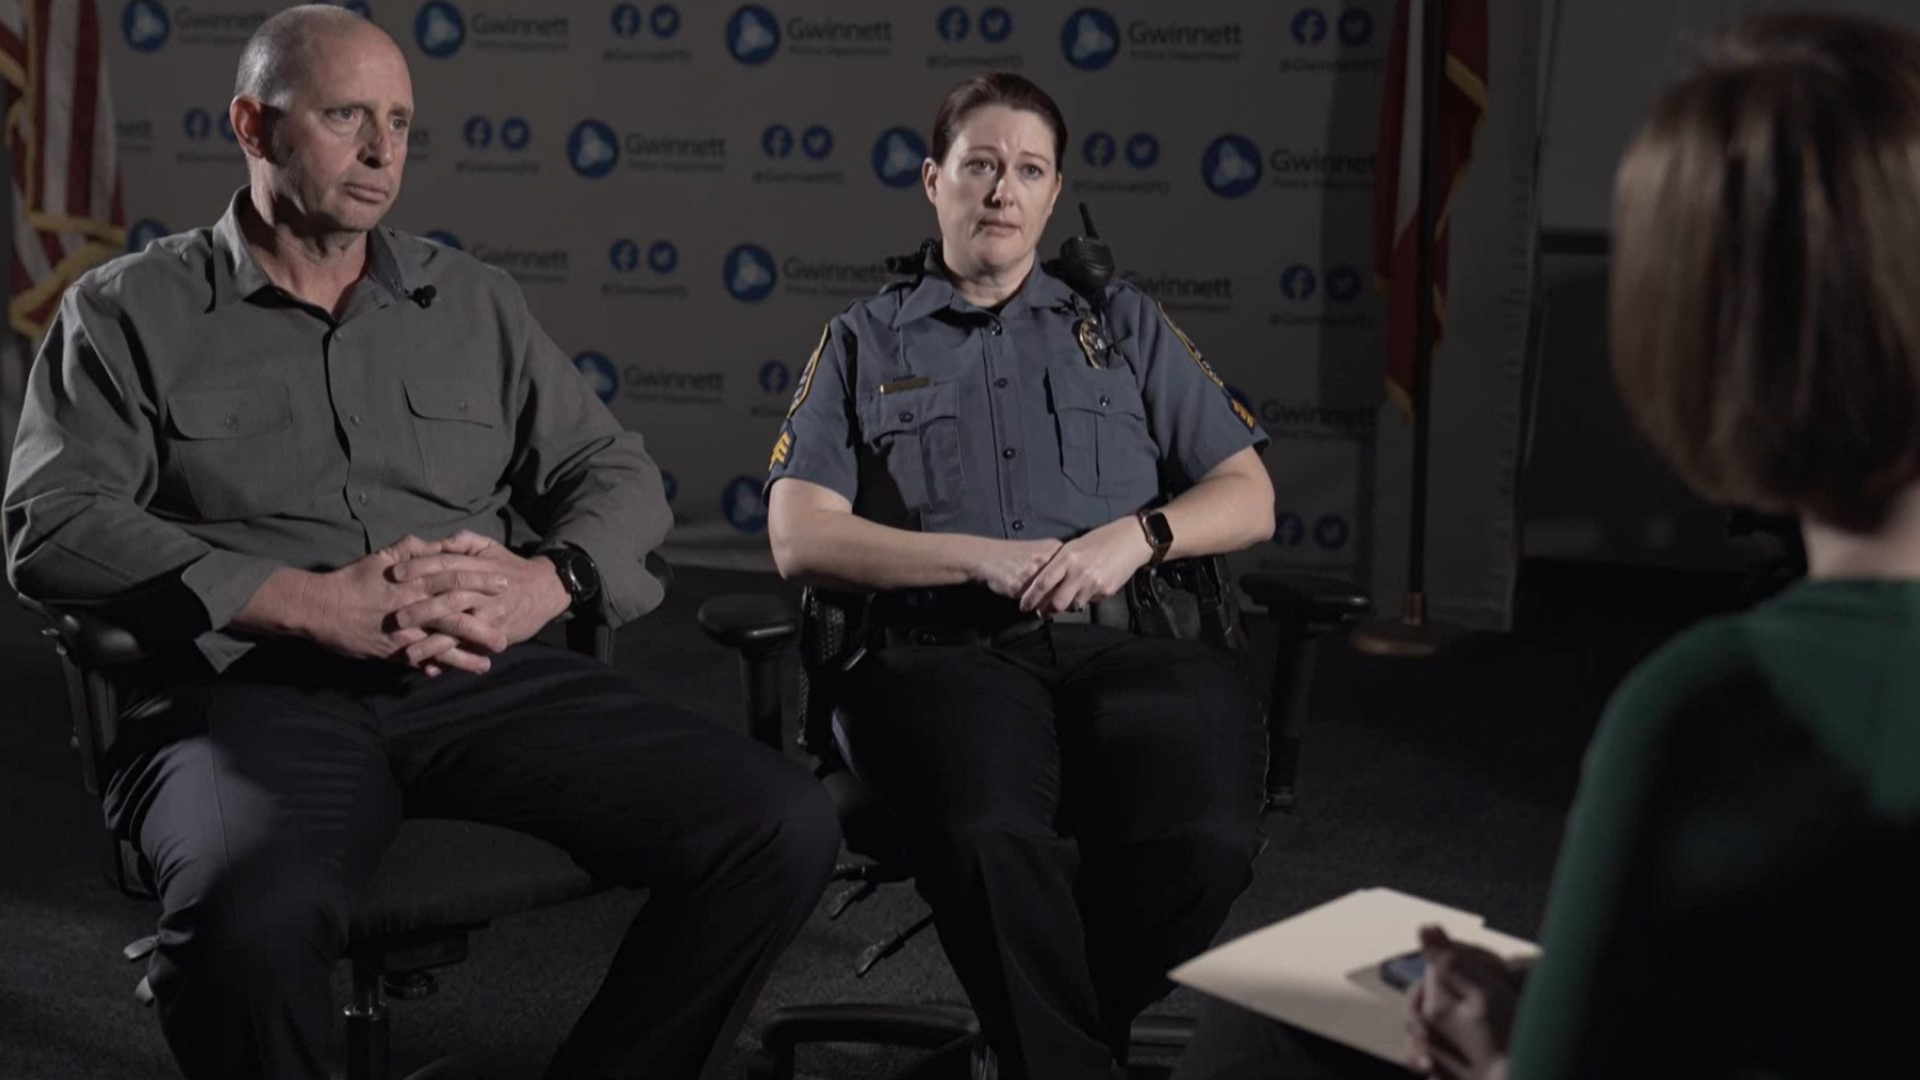 11Alive's investigation "An Exceptional Problem" examines how police are clearing rape cases without making arrests. Here's what two Gwinnett PD officers had to say.